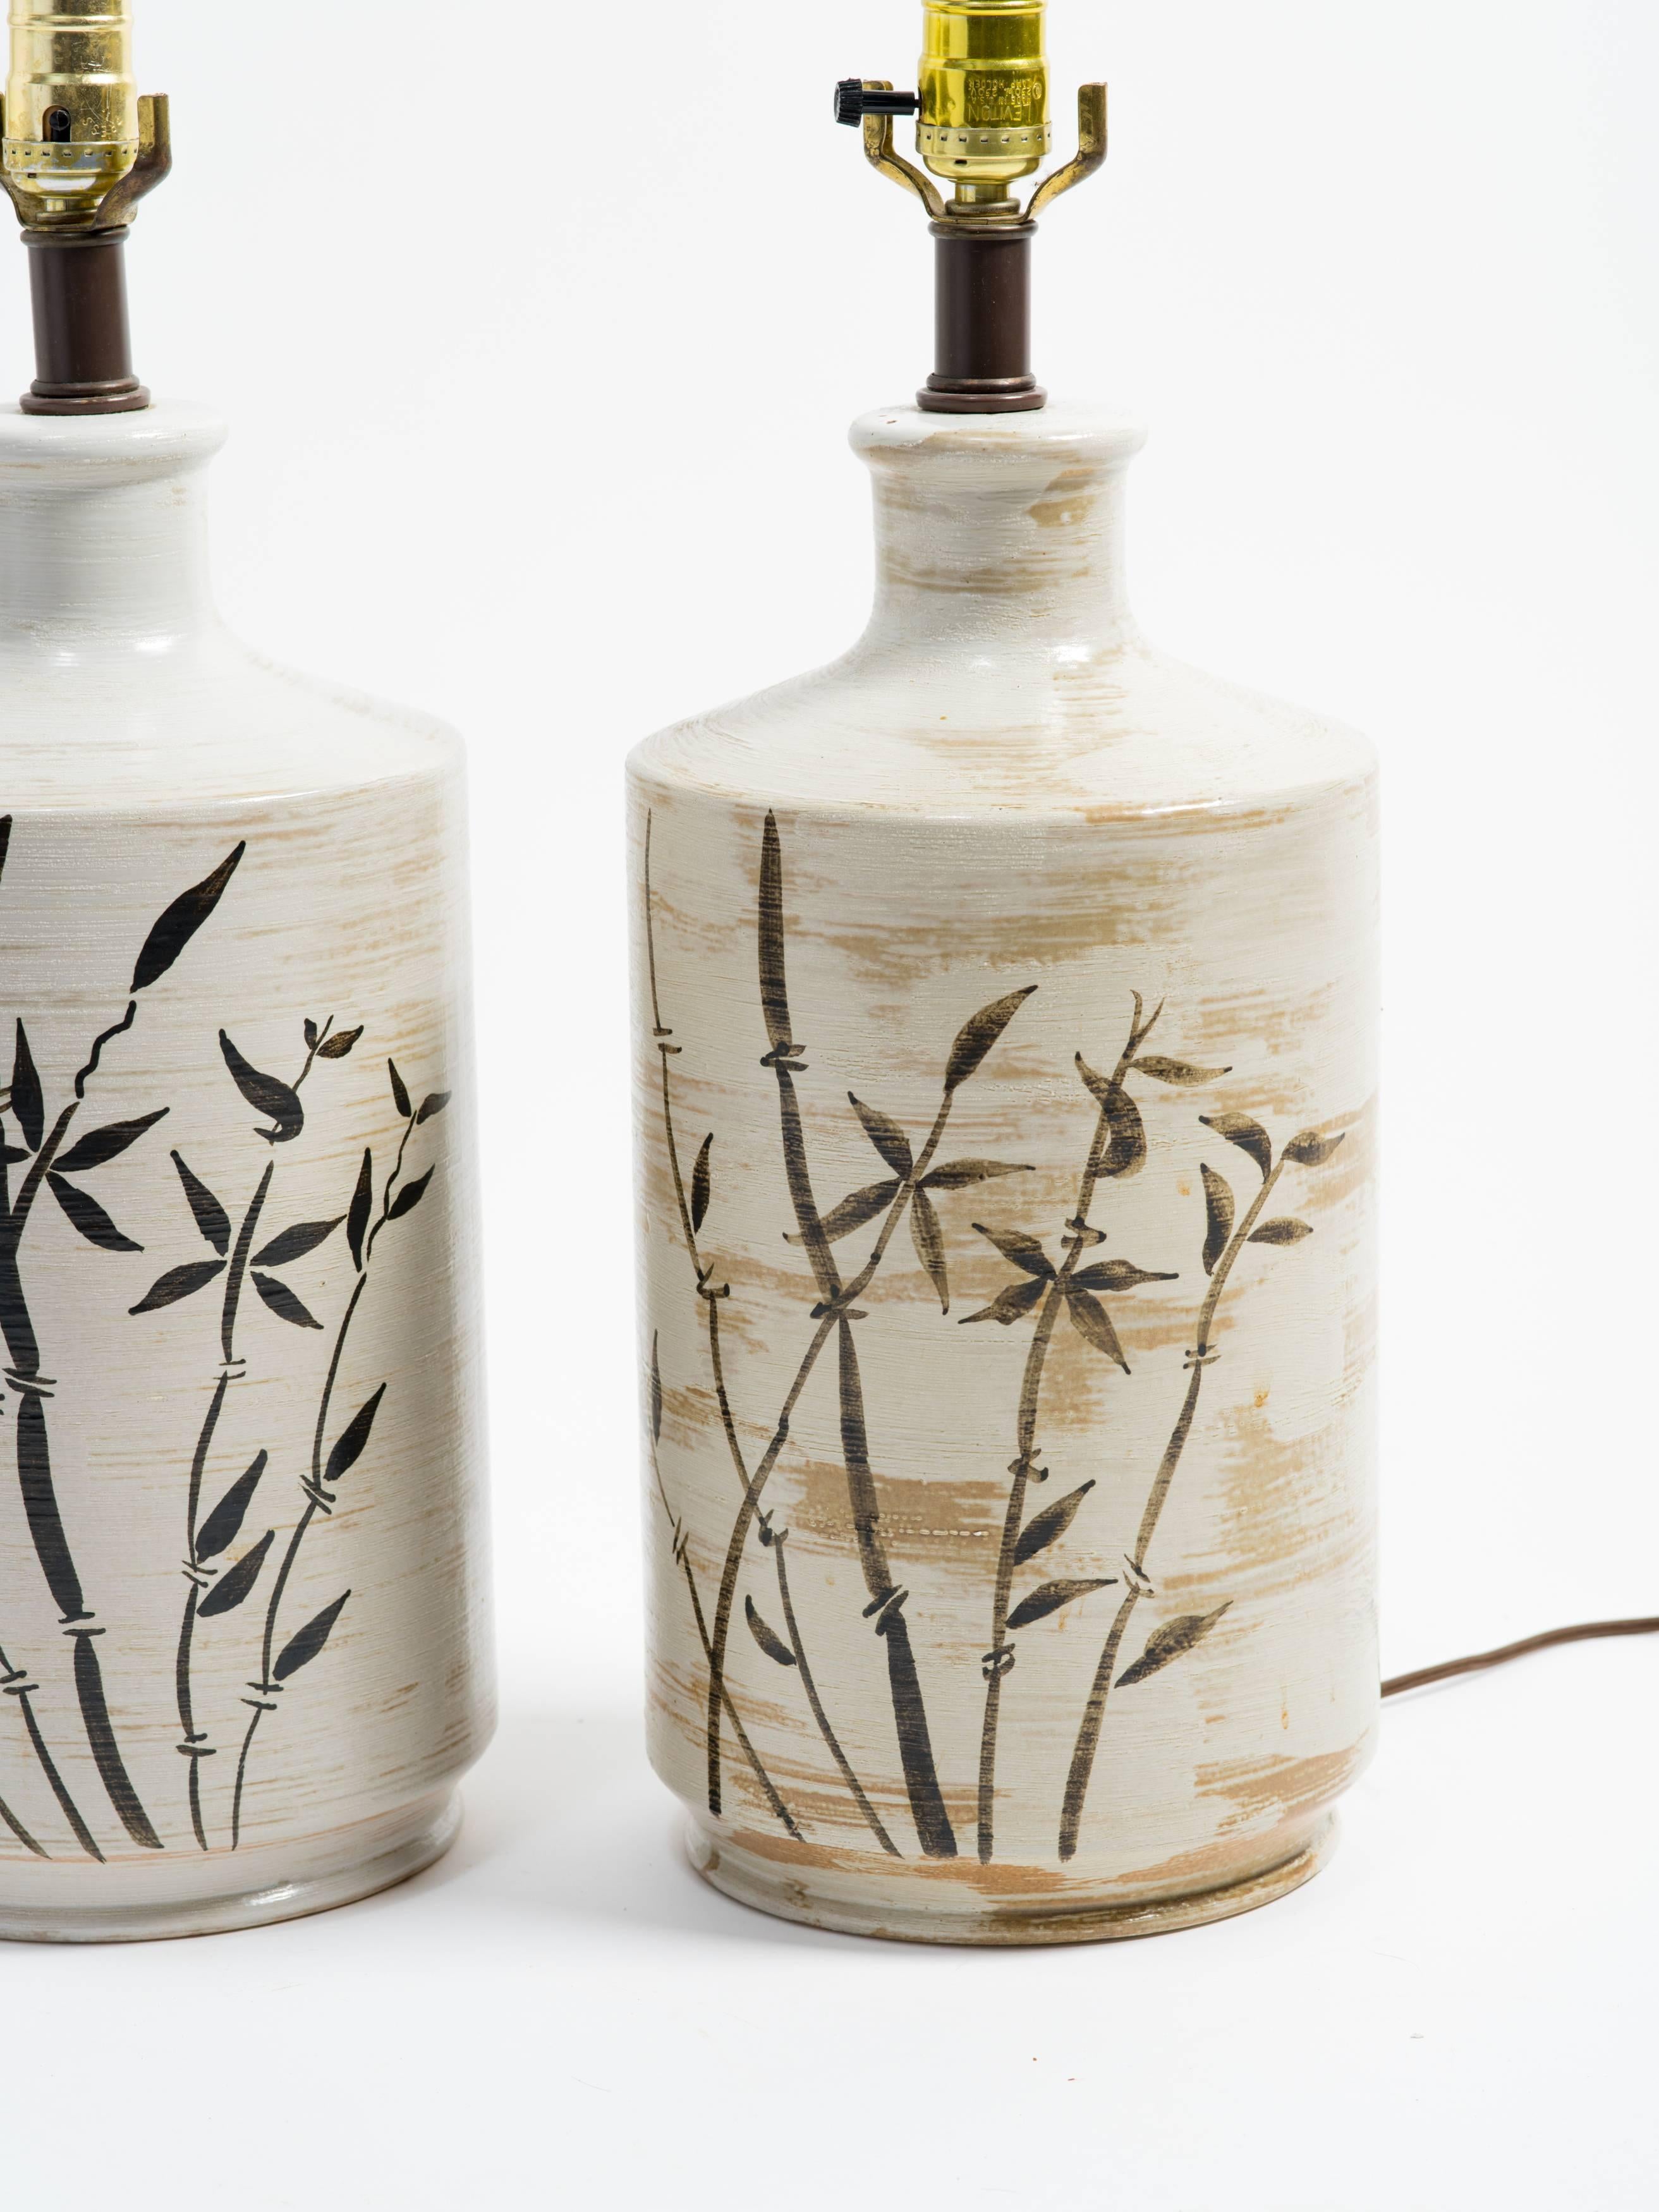 Pair of ceramic table lamps with painted bamboo trees.